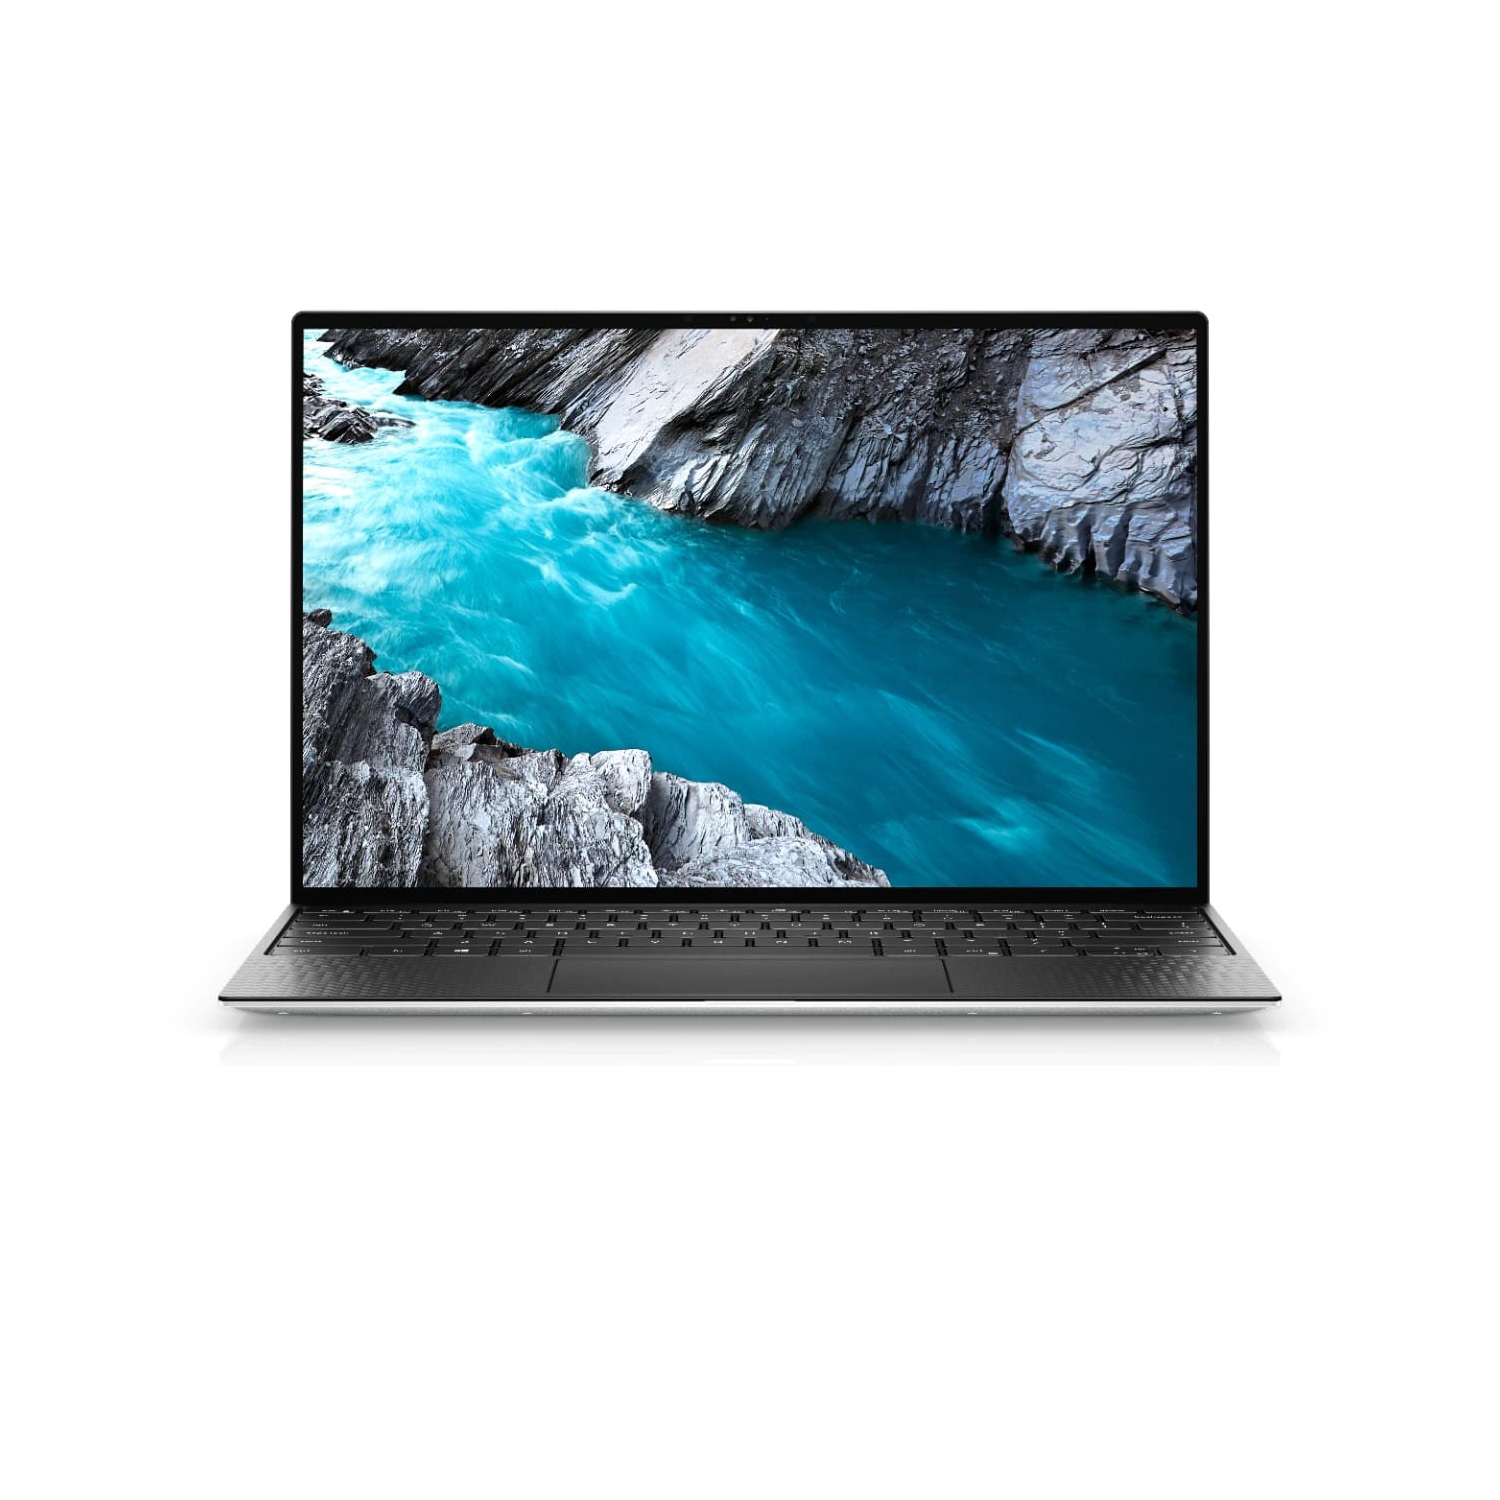 Refurbished (Excellent) - Dell XPS 13 9300 Laptop (2020) | 13.3" FHD+ | Core i5 - 256GB SSD - 8GB RAM | 4 Cores @ 3.6 GHz - 10th Gen CPU Certified Refurbished